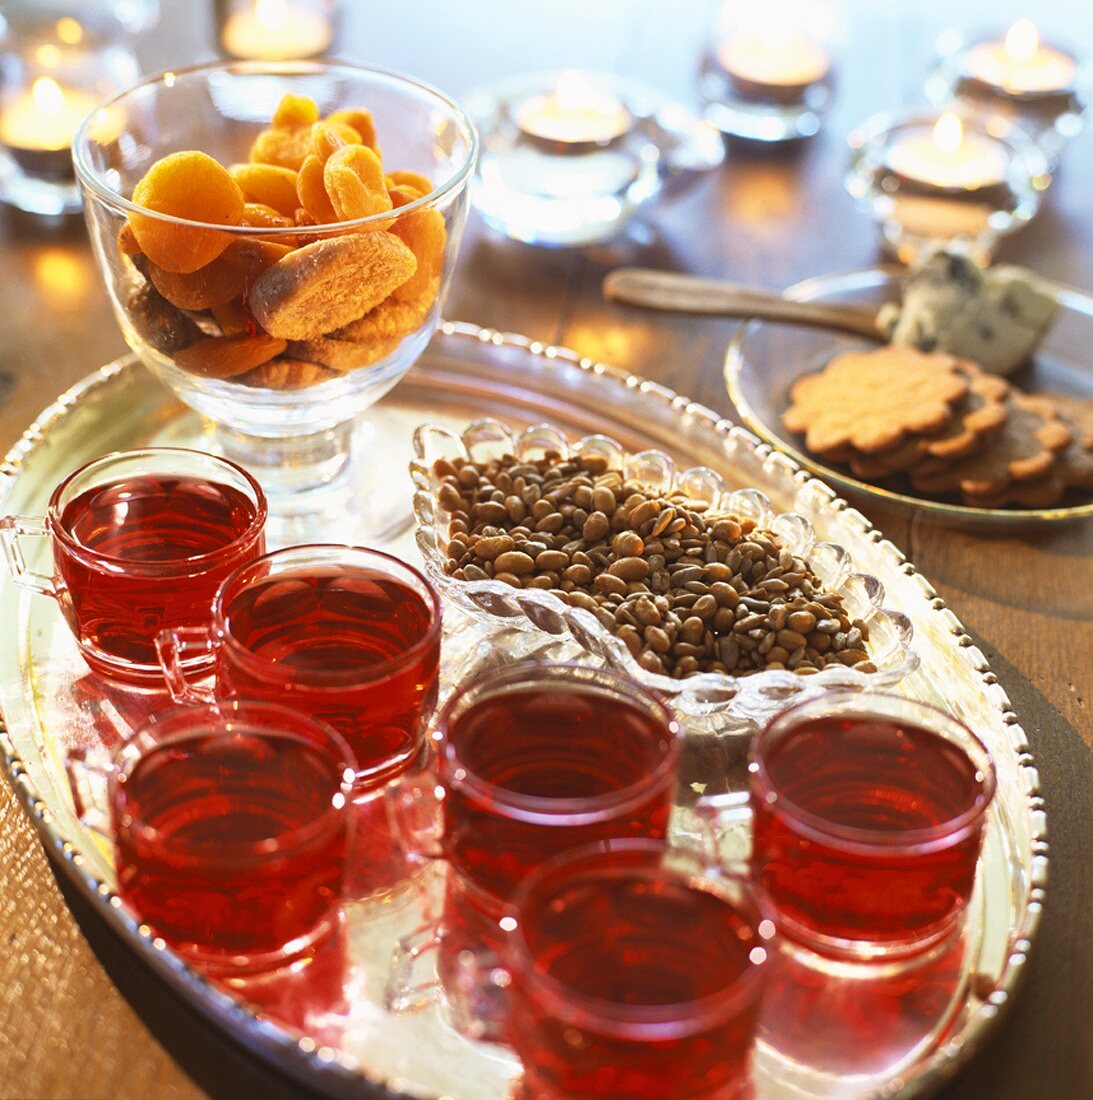 Warm cranberry punch and sweet nibbles on a tray